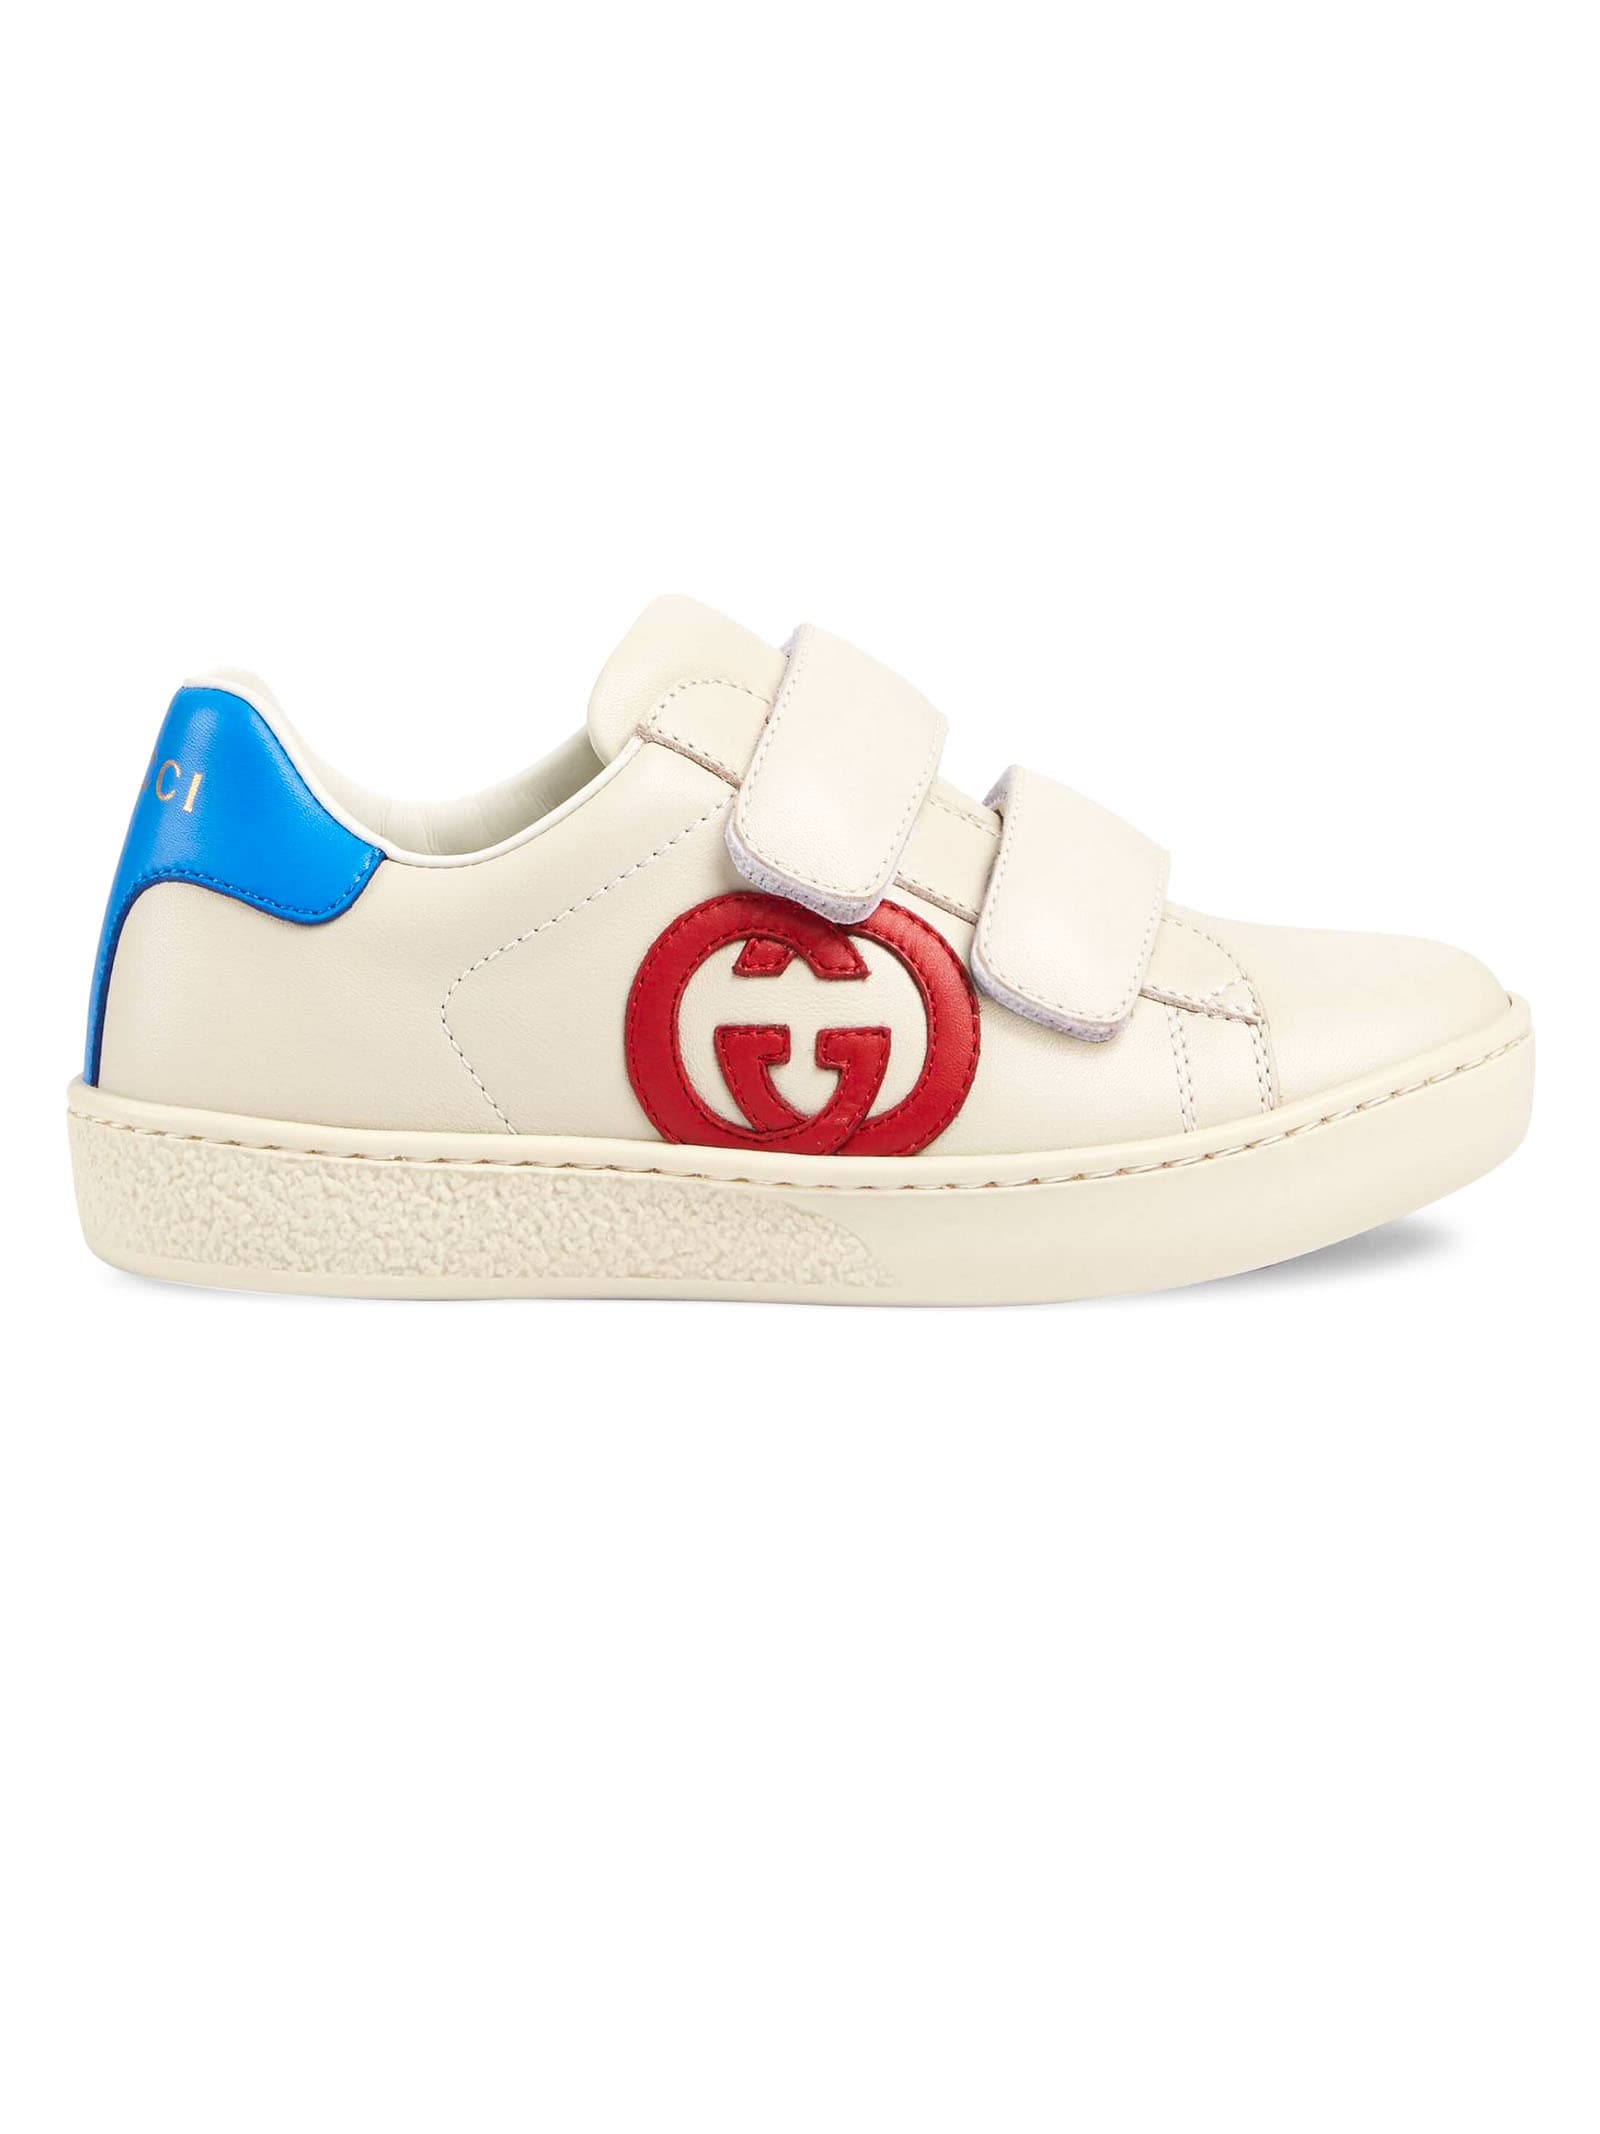 Gucci Toddler Ace Sneaker